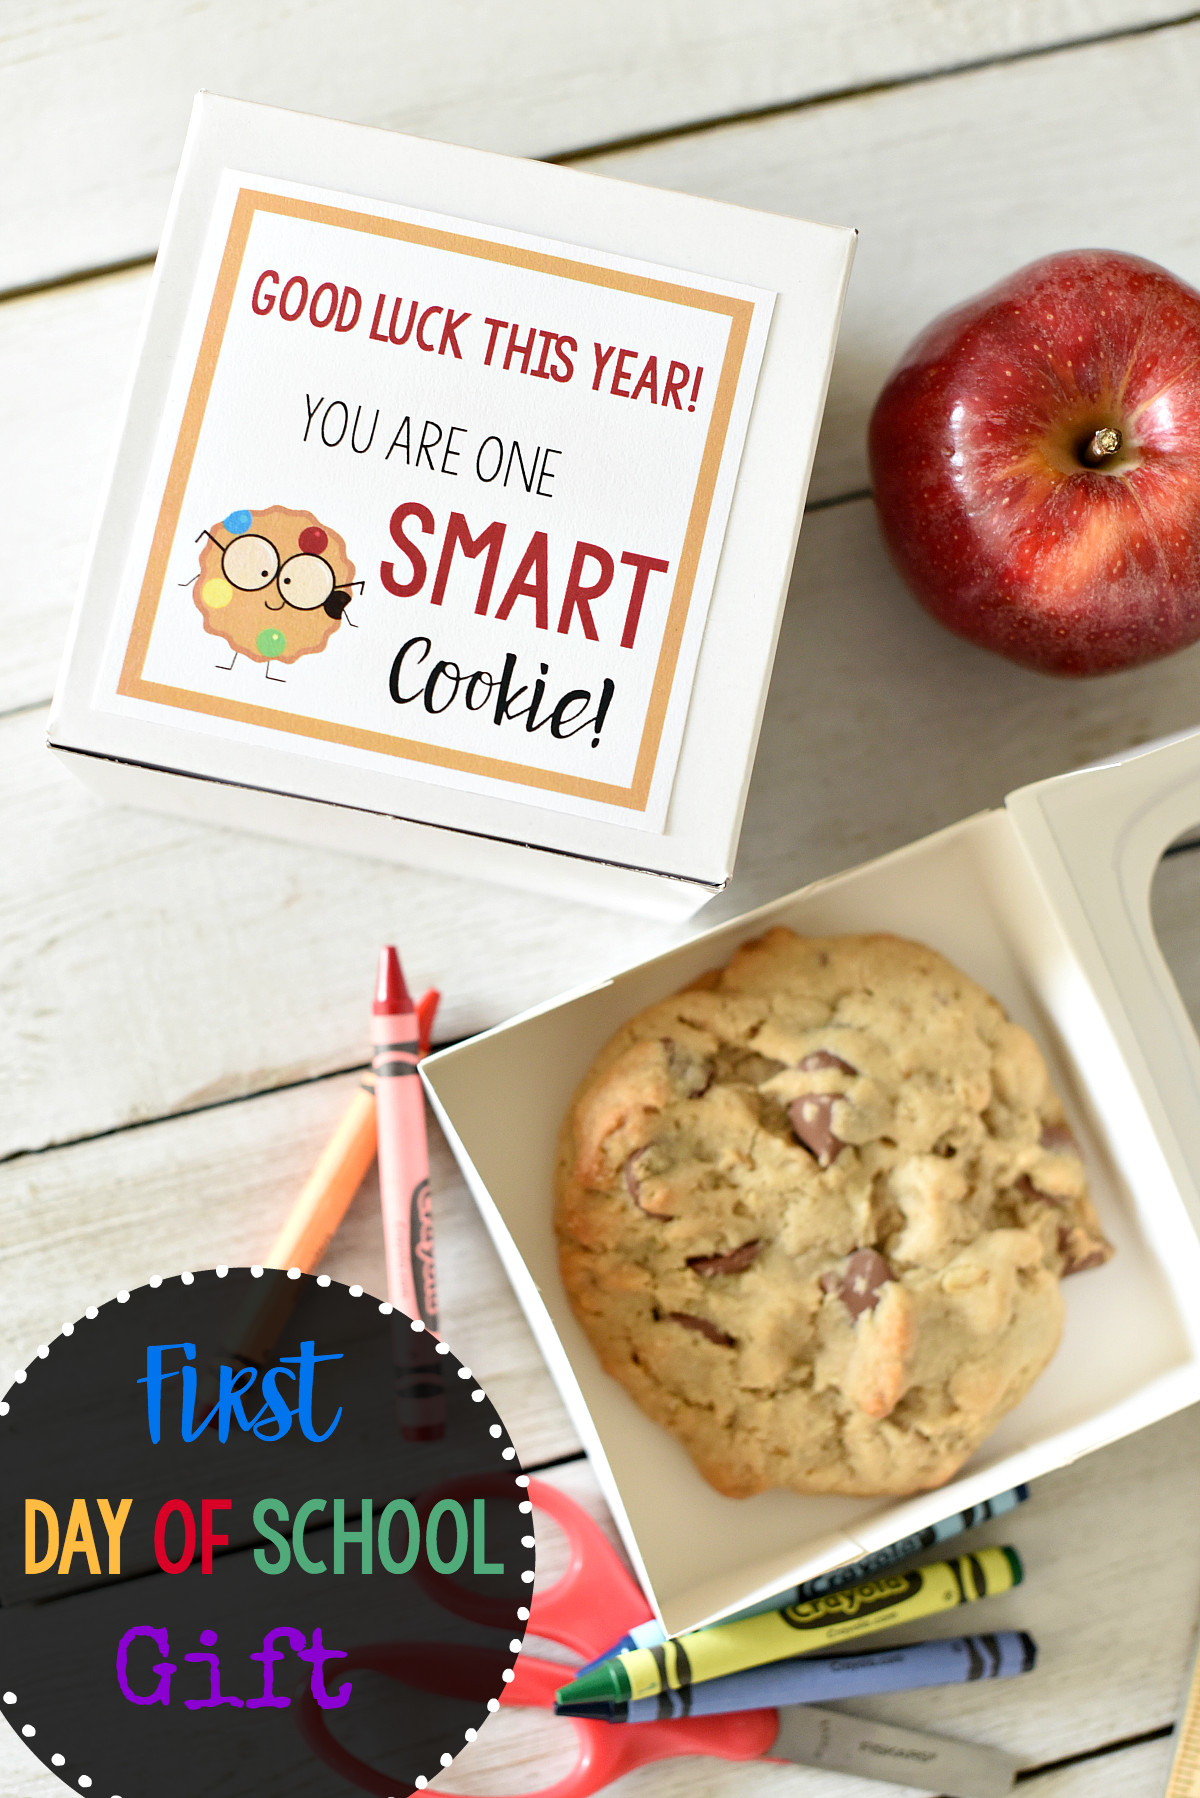 First Day Of School Gifts For Kids
 First Day of School Gifts Smart Cookie